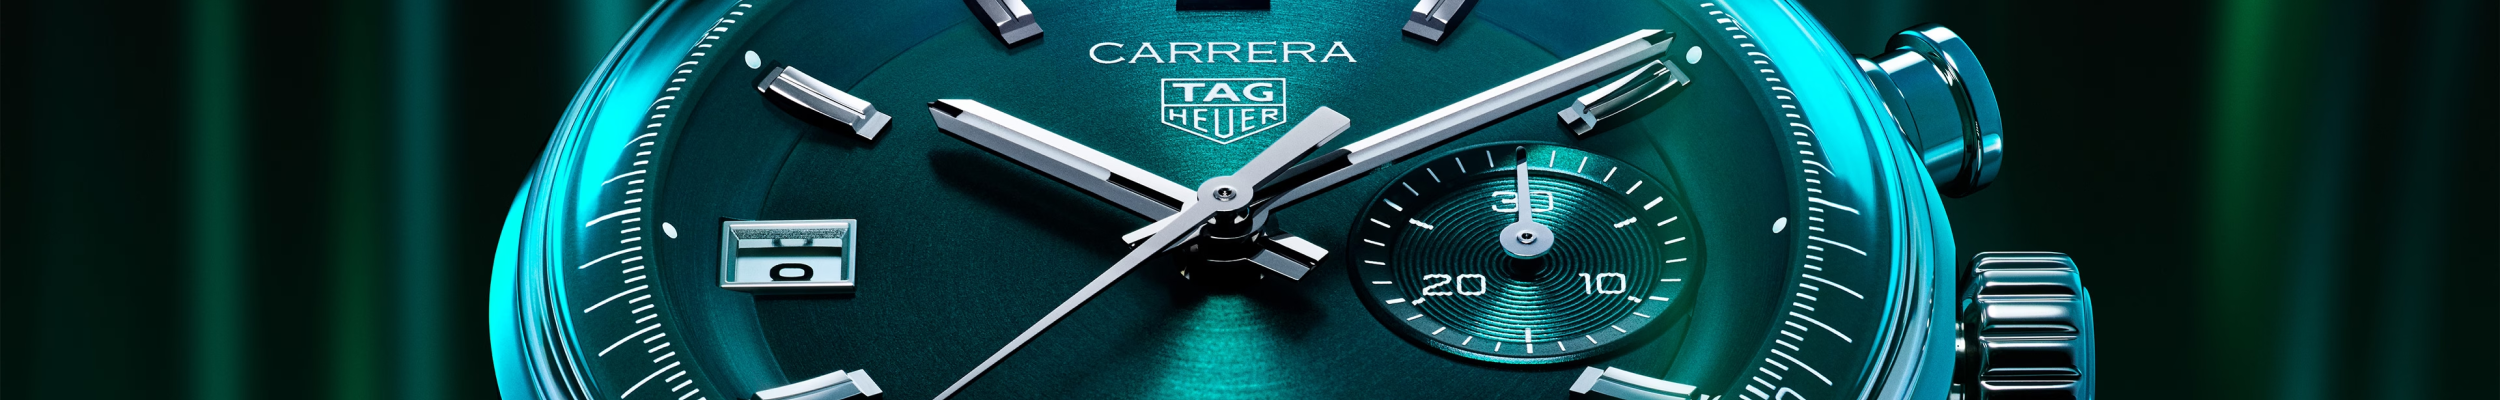 The TAG Heuer Dato with a green dial. Model #CBS2211.FC6545